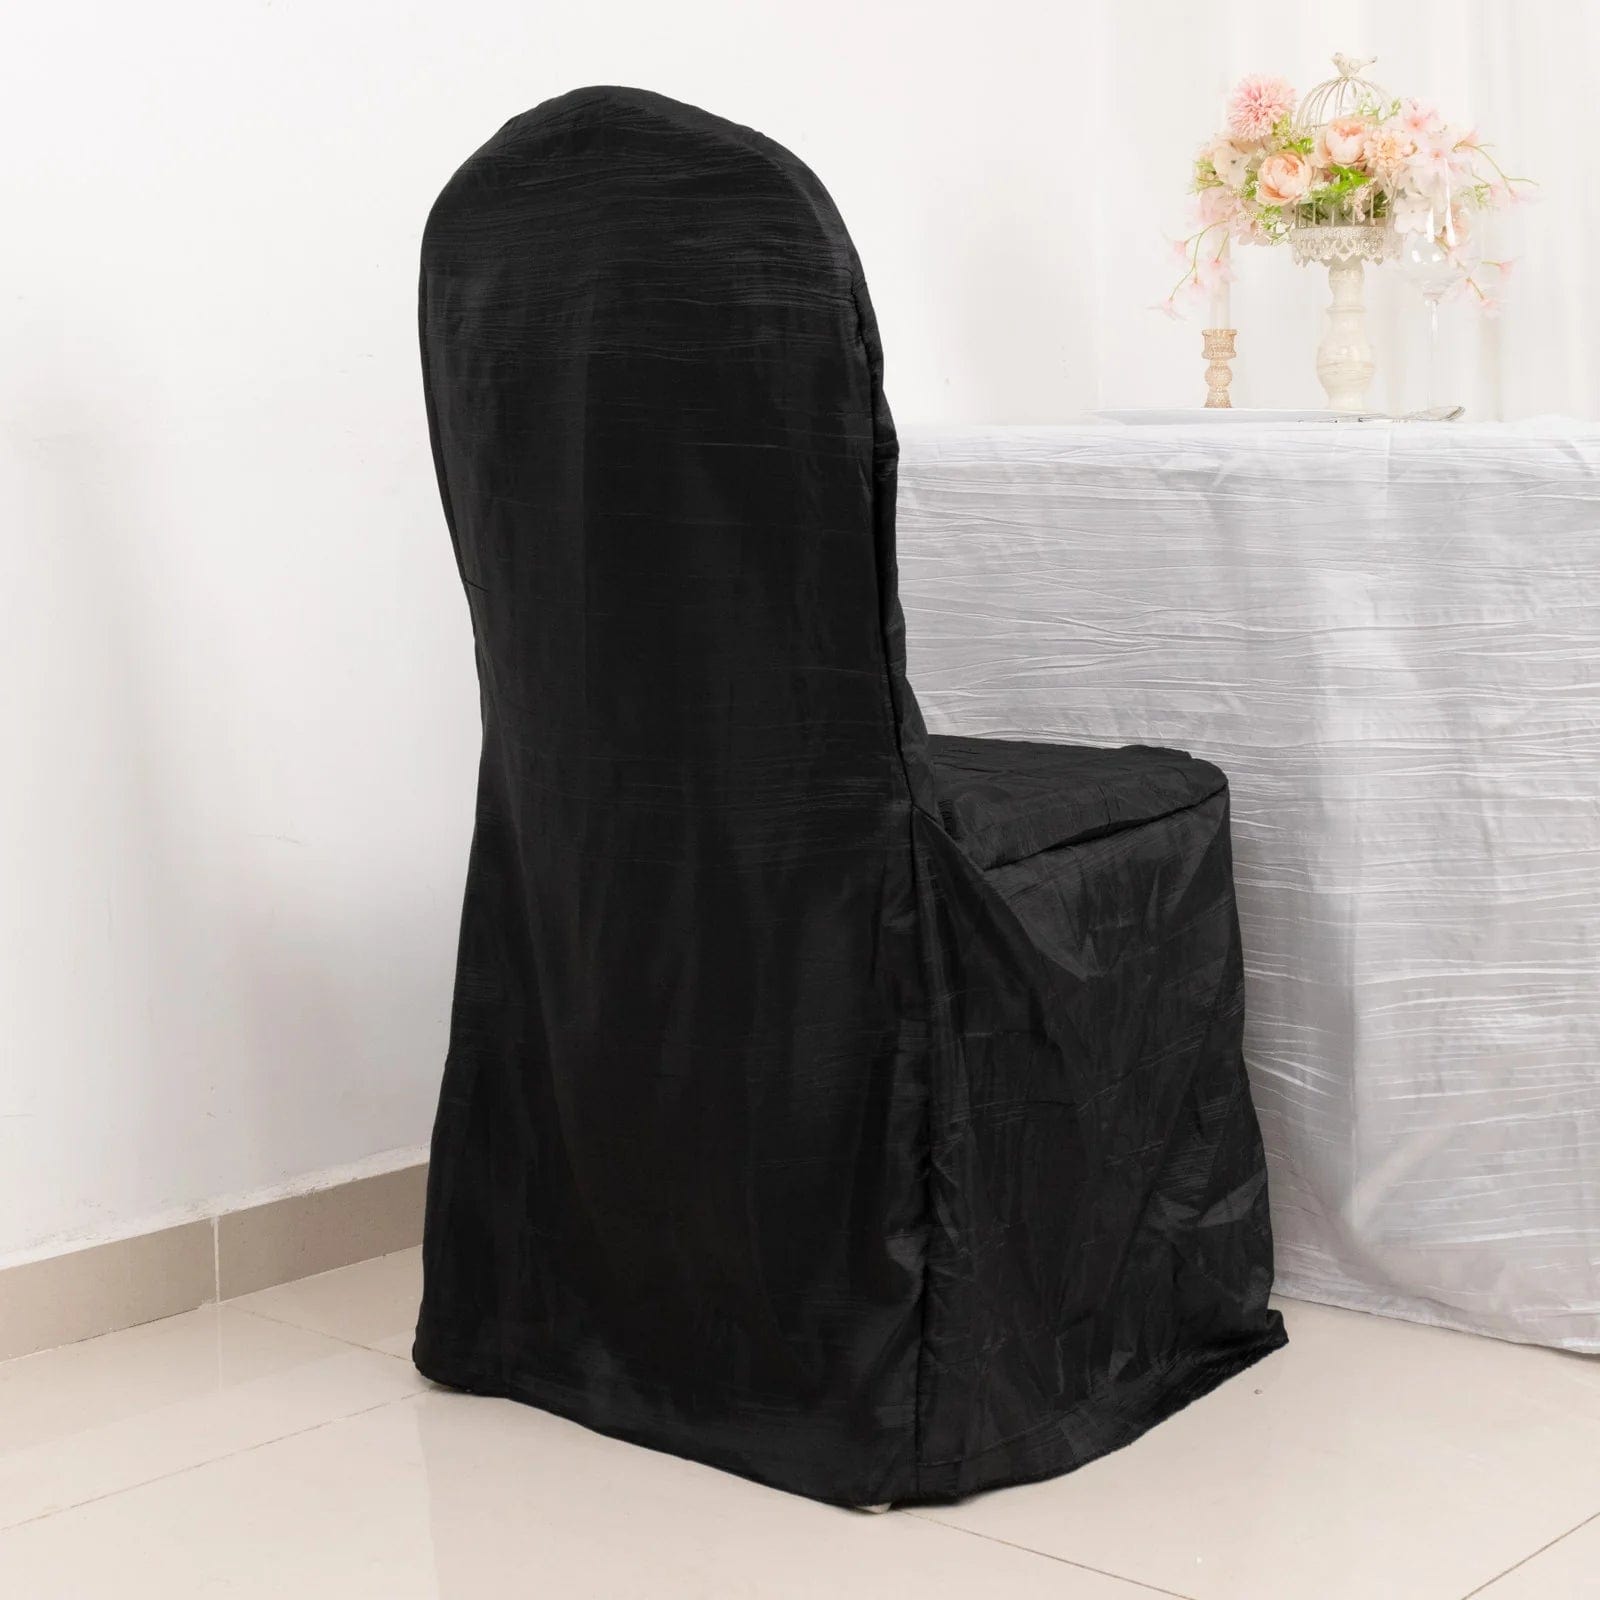 Do Spandex Folding Chair Covers fit Blow Mold Folding Chairs?